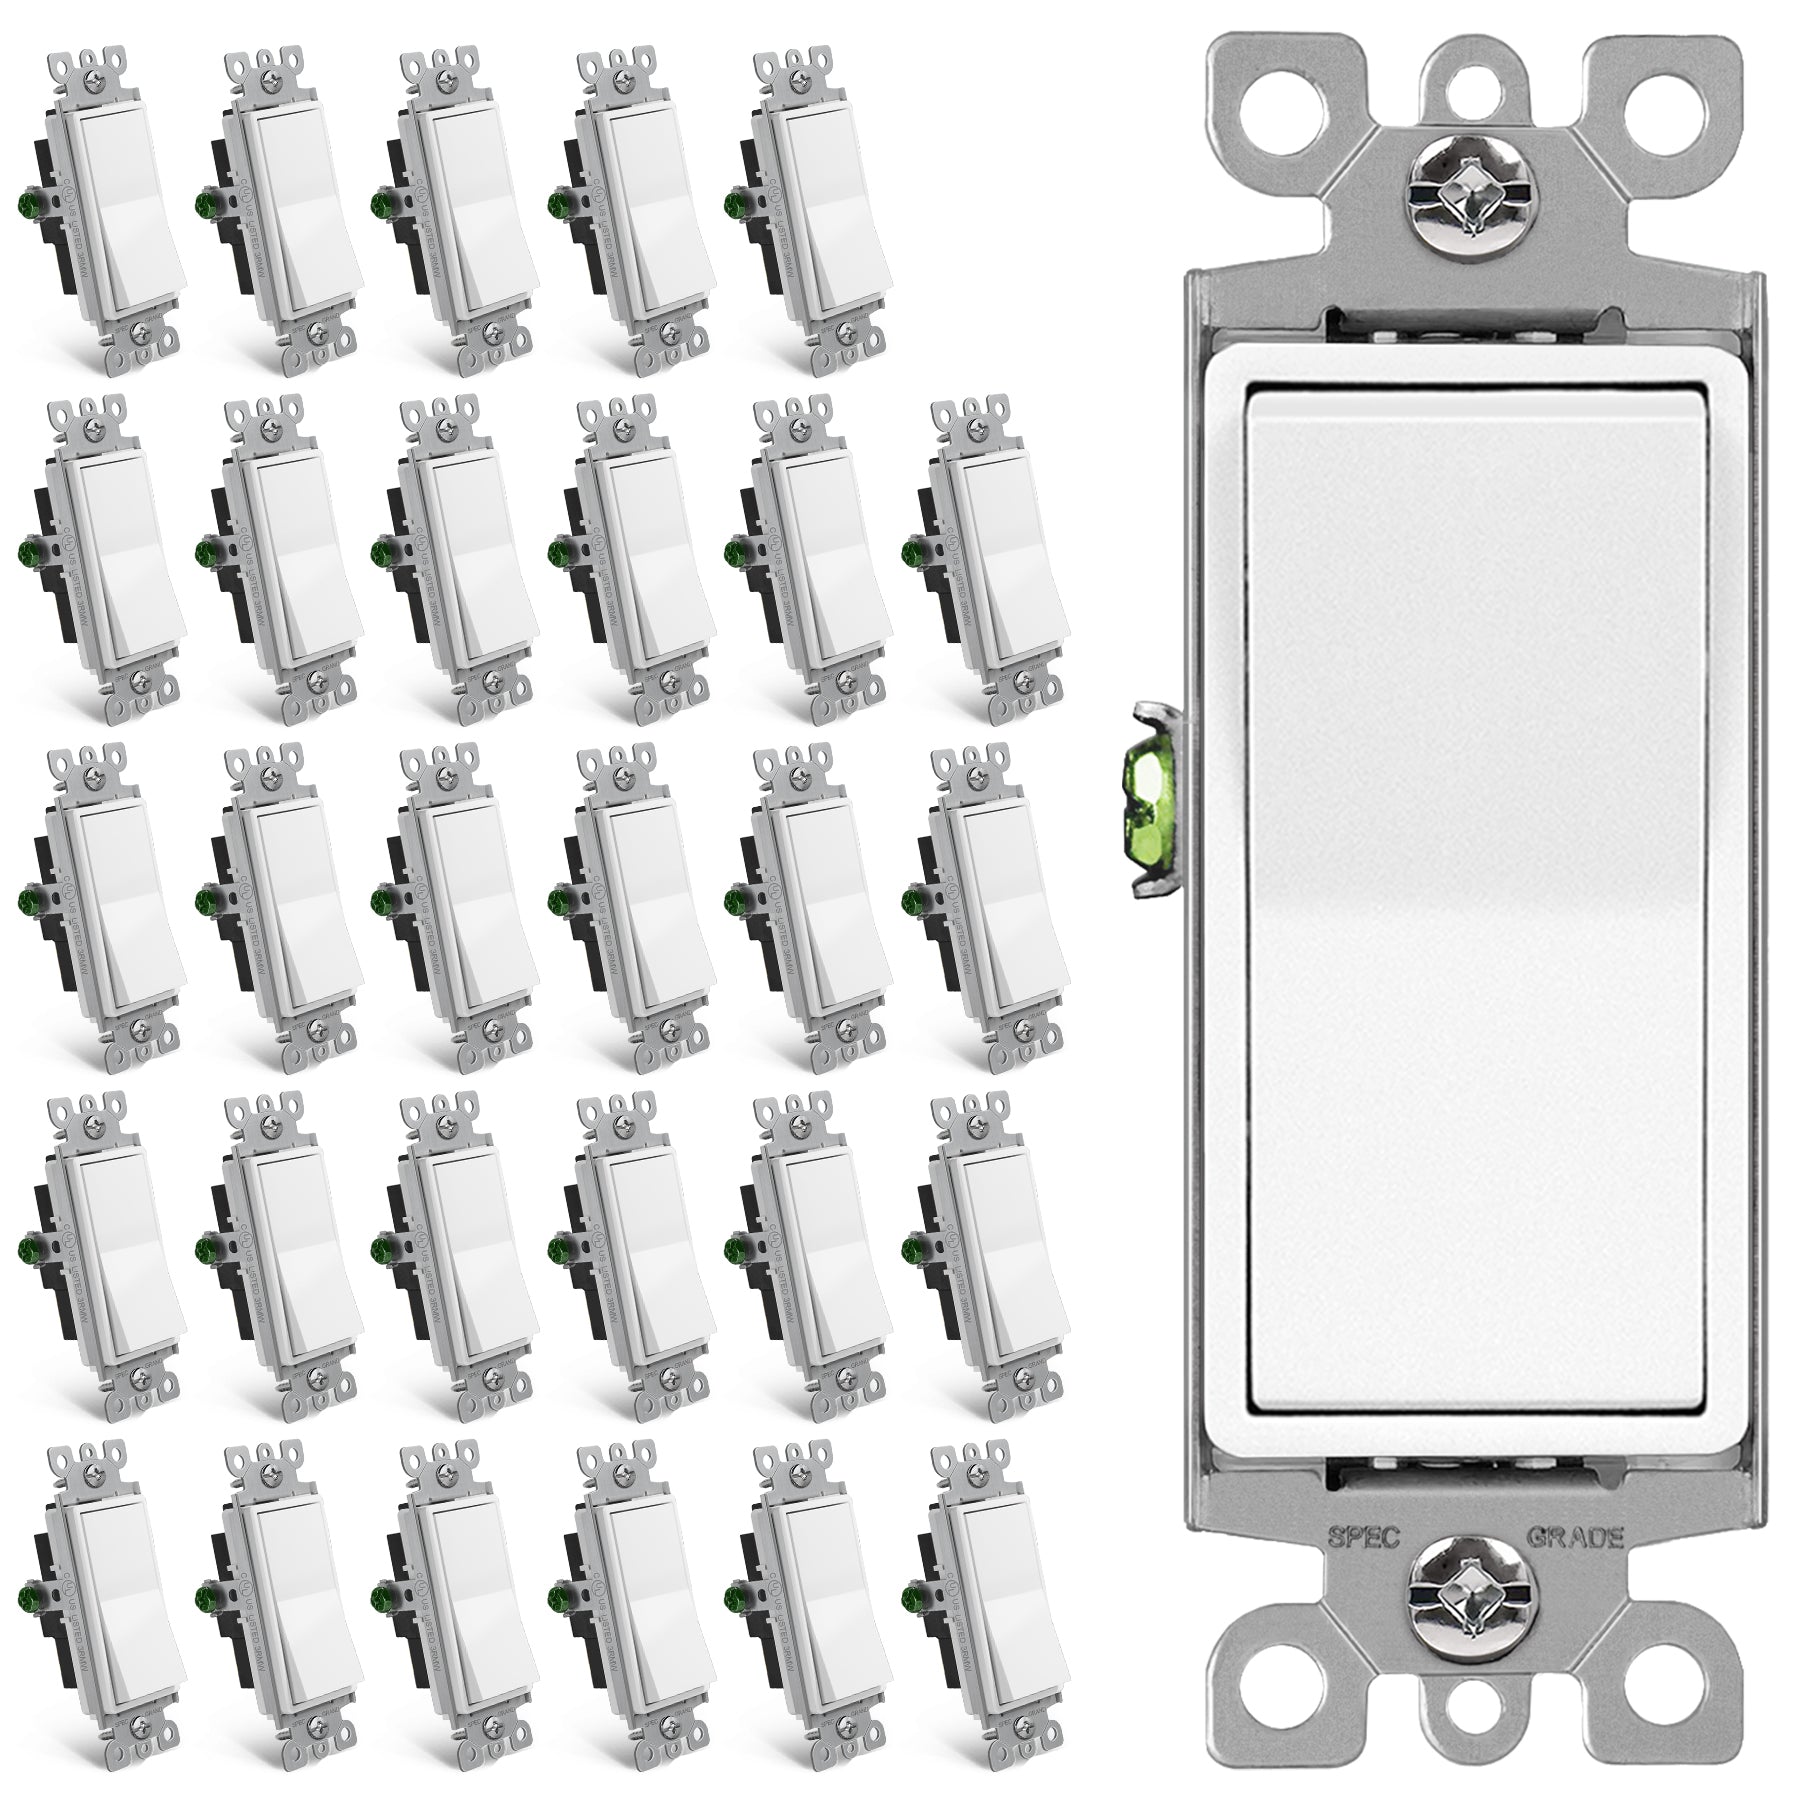 30 Pack BESTTEN 3-Way Decorator Wall Light Switch, 15A 120V, Paddle Wall Switch, On Off Rocker Interrupter, ETL Listed,White - 3